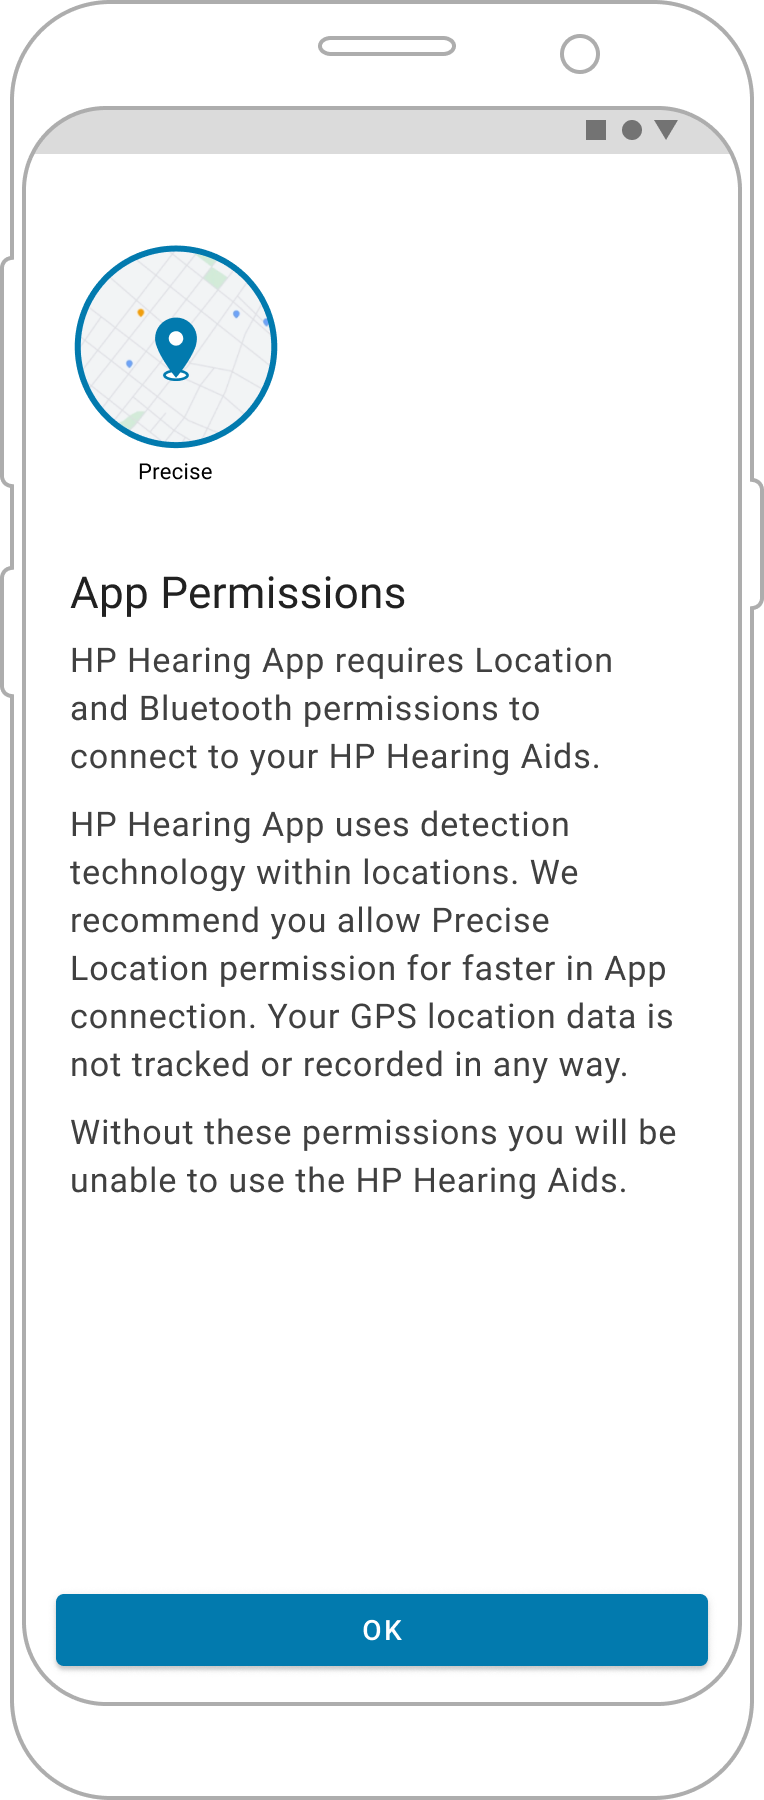 USR-SUP-002-34_-_HP_Hearing_PRO_Support_Asset_____Pairing_and_connecting_my_hearing_aids_-v1.0.png